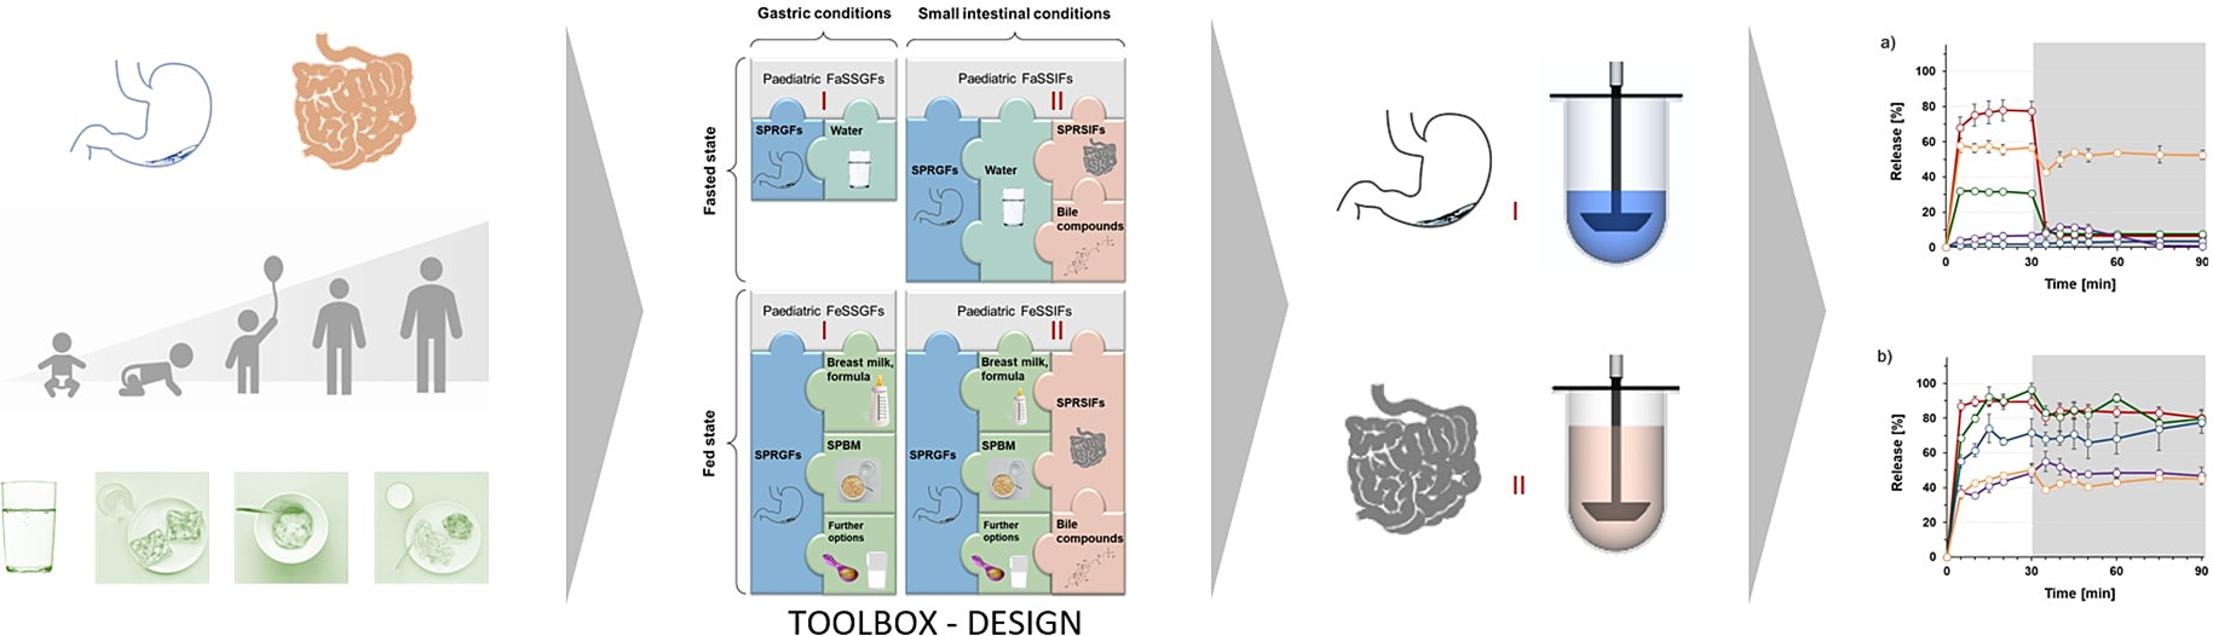 A toolbox for mimicking gastrointestinal conditions in children